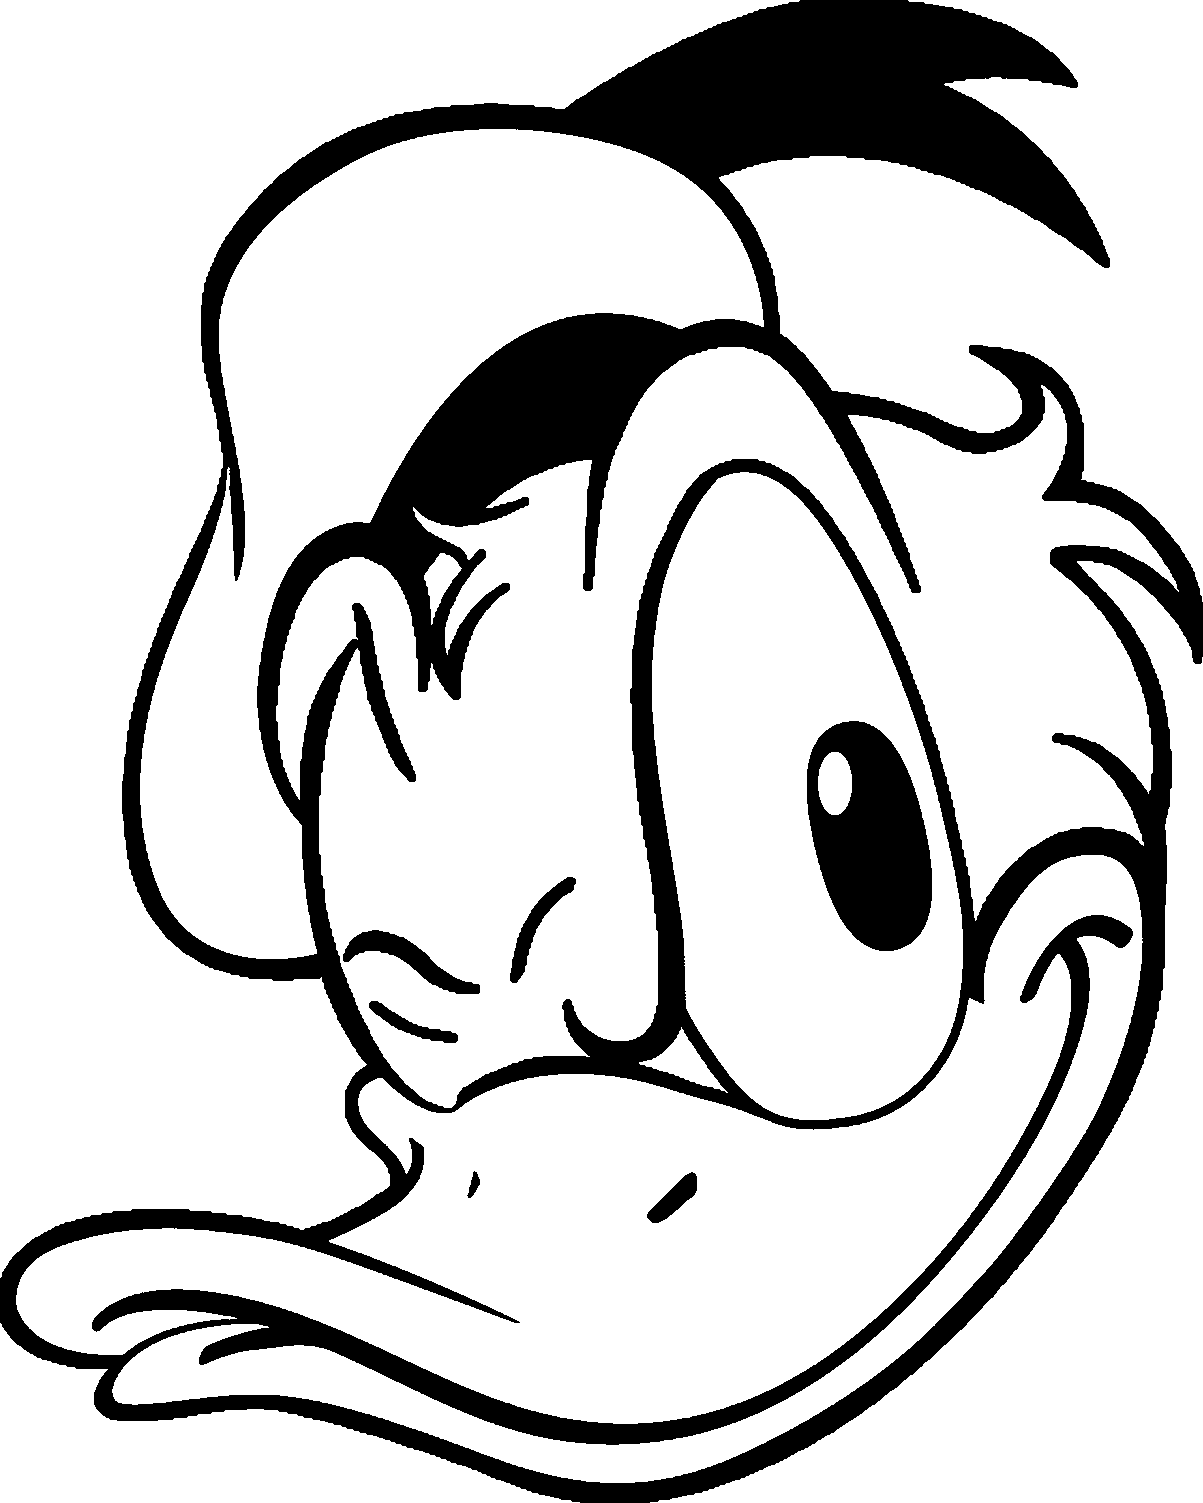 Donald Duck Coloring Page